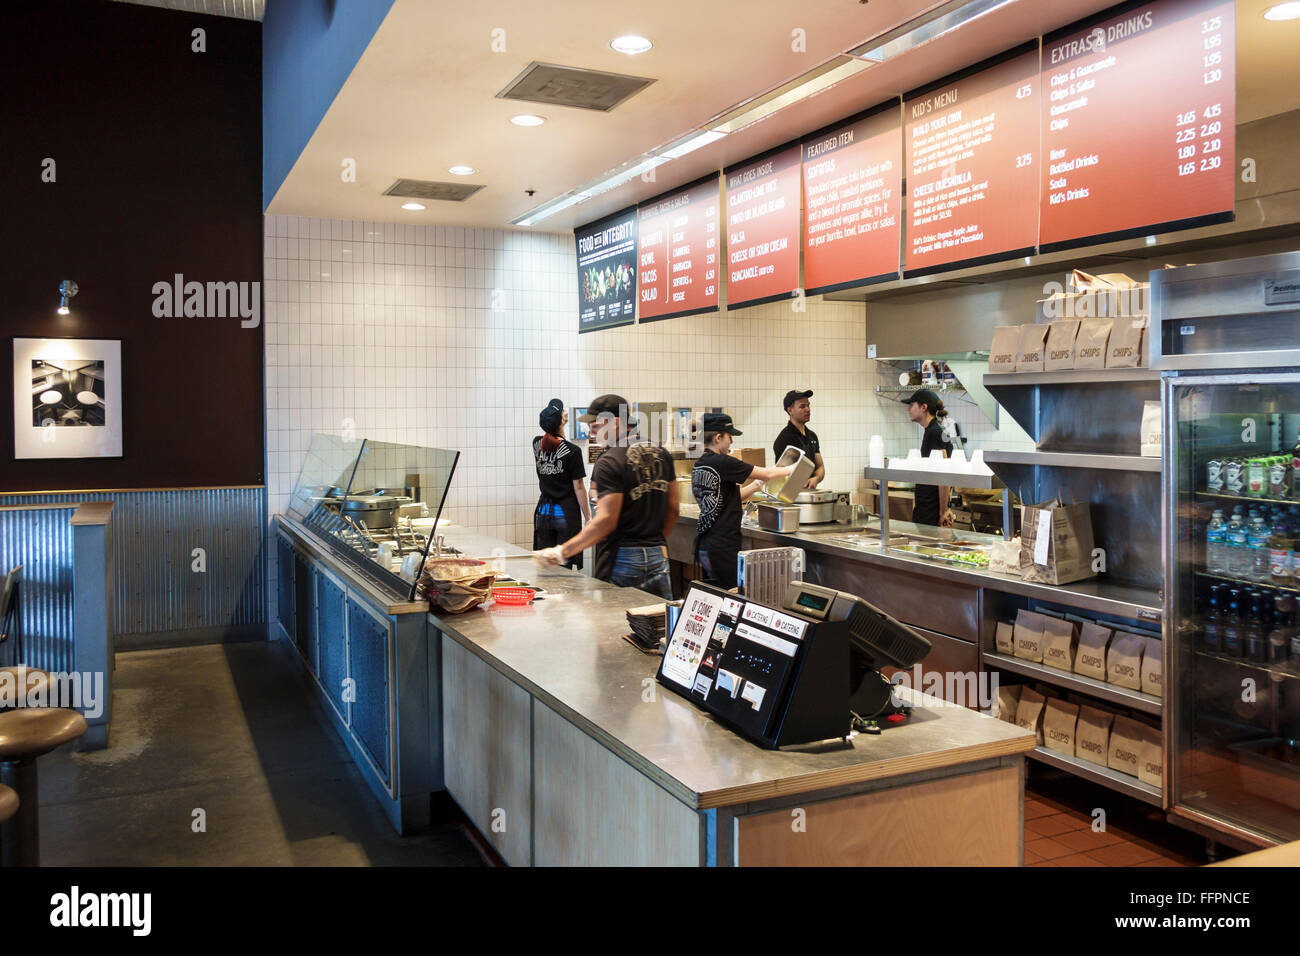 Florida South,Port St. Saint Lucie,Chipotle,restaurant restaurants food dining cafe cafes,Mexican,food,interior inside,counter,employees,FL151209002 Stock Photo